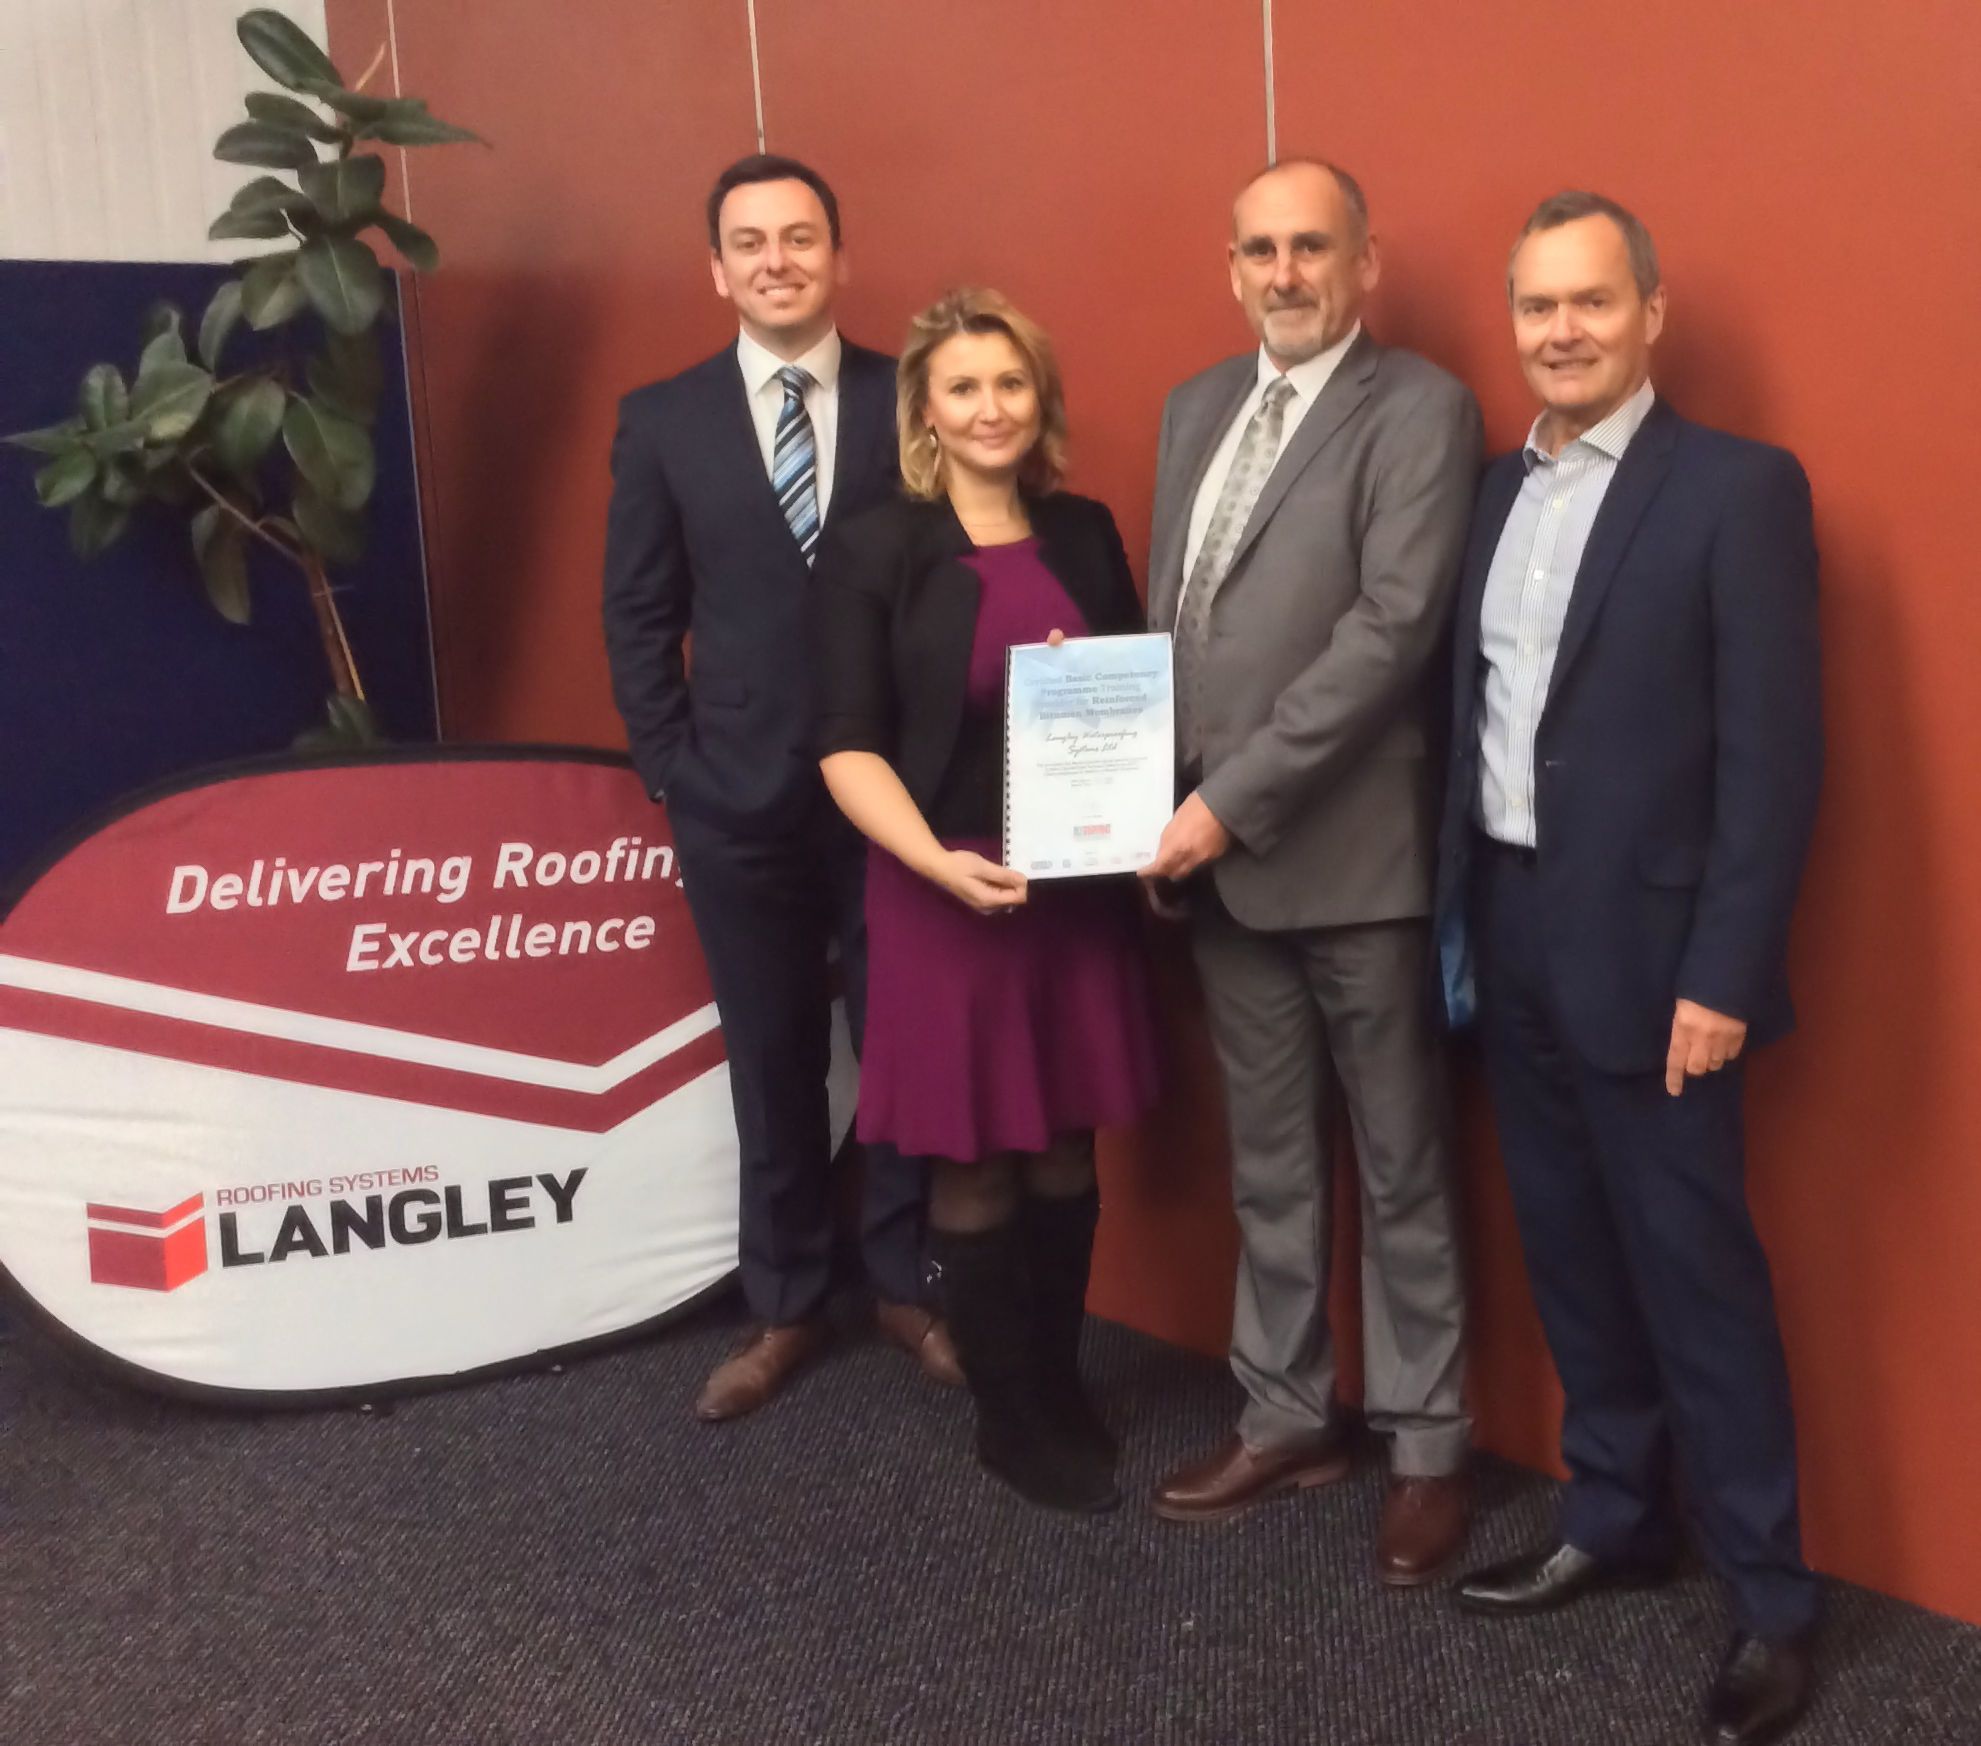 (L–R) Mike Smith, head of technical at Langley; Livia Williams MBA, FIoR, head of training at the NFRC; Mark Dunn, learning and development manager at Langley; John Austine, technical director at Langley